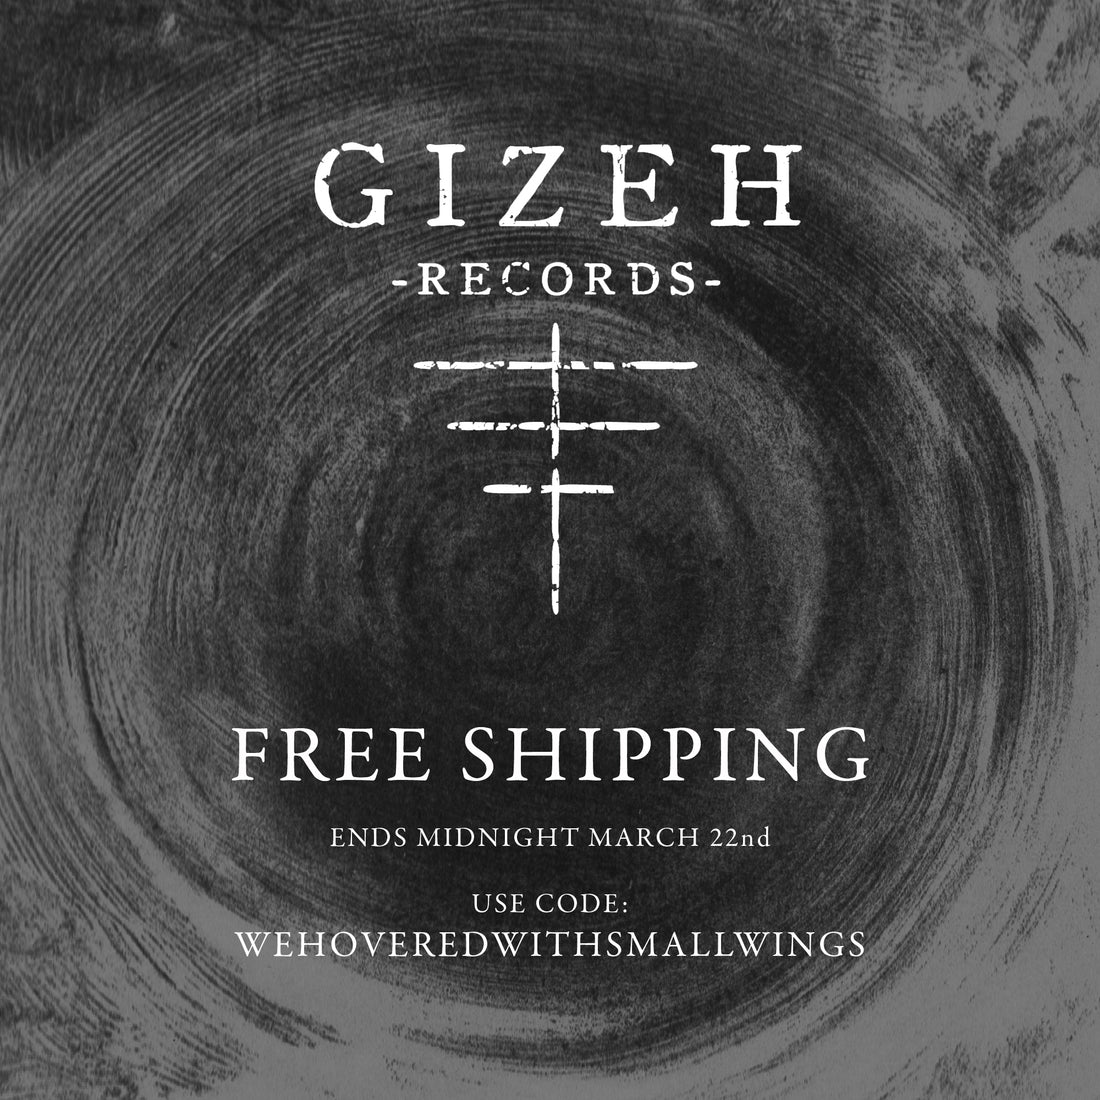 BANDCAMP ARTIST / LABEL SUPPORT + FREE SHIPPING THIS WEEKEND